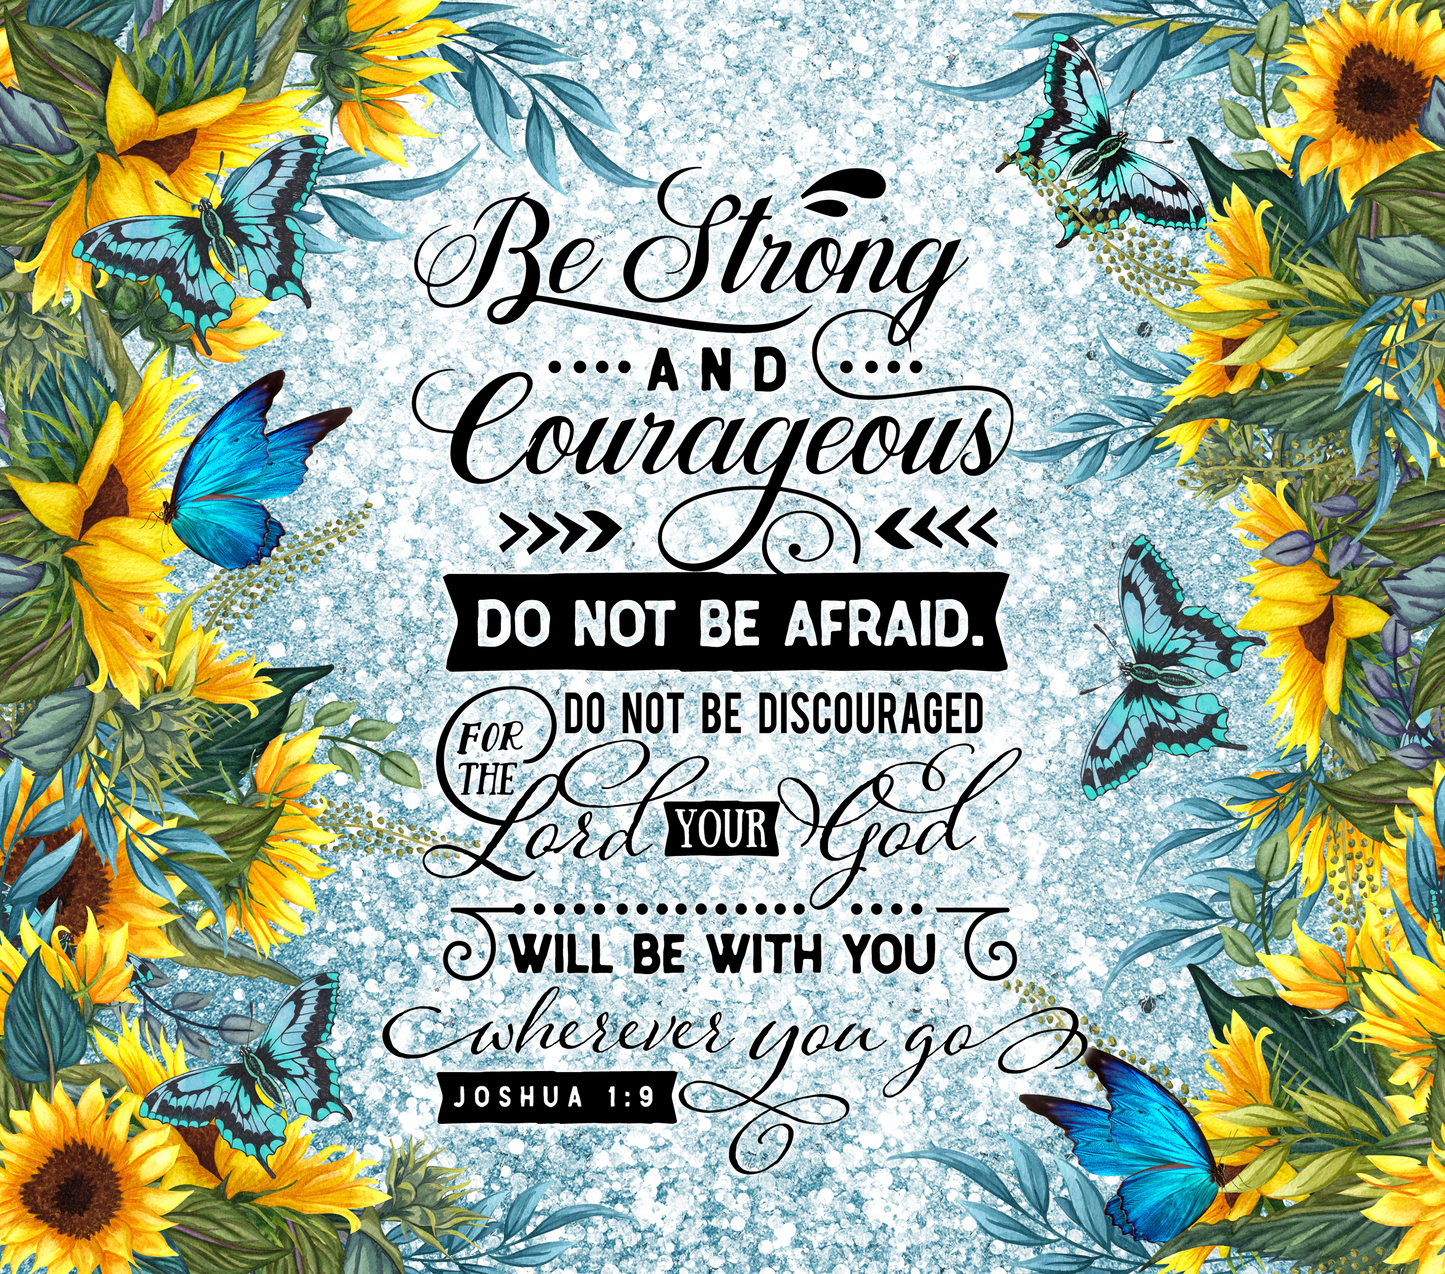 Copy of Be Strong And Courageous- Blue Glitter Floral - 20 Oz Sublimation Transfer